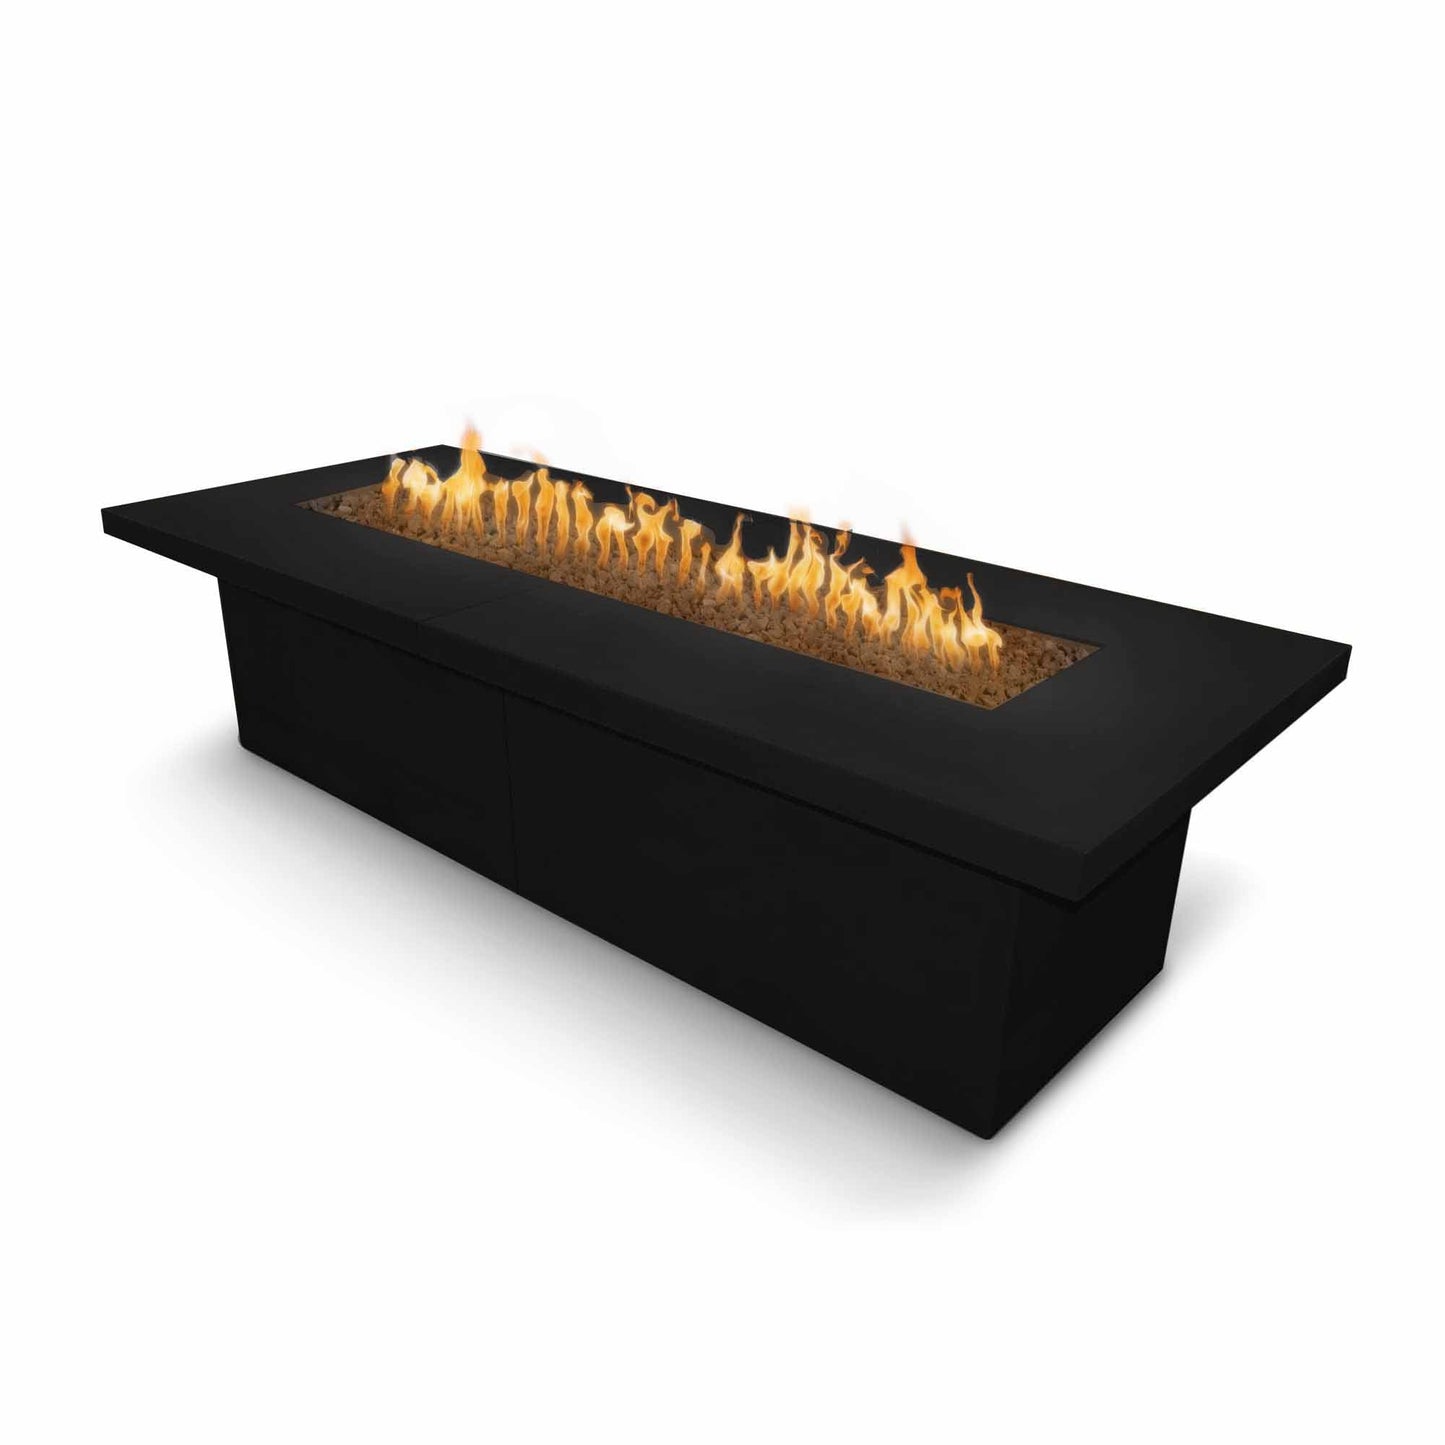 The Outdoor Plus Rectangular Newport 144" Hammered Copper Liquid Propane Fire Pit with Flame Sense with Spark Ignition